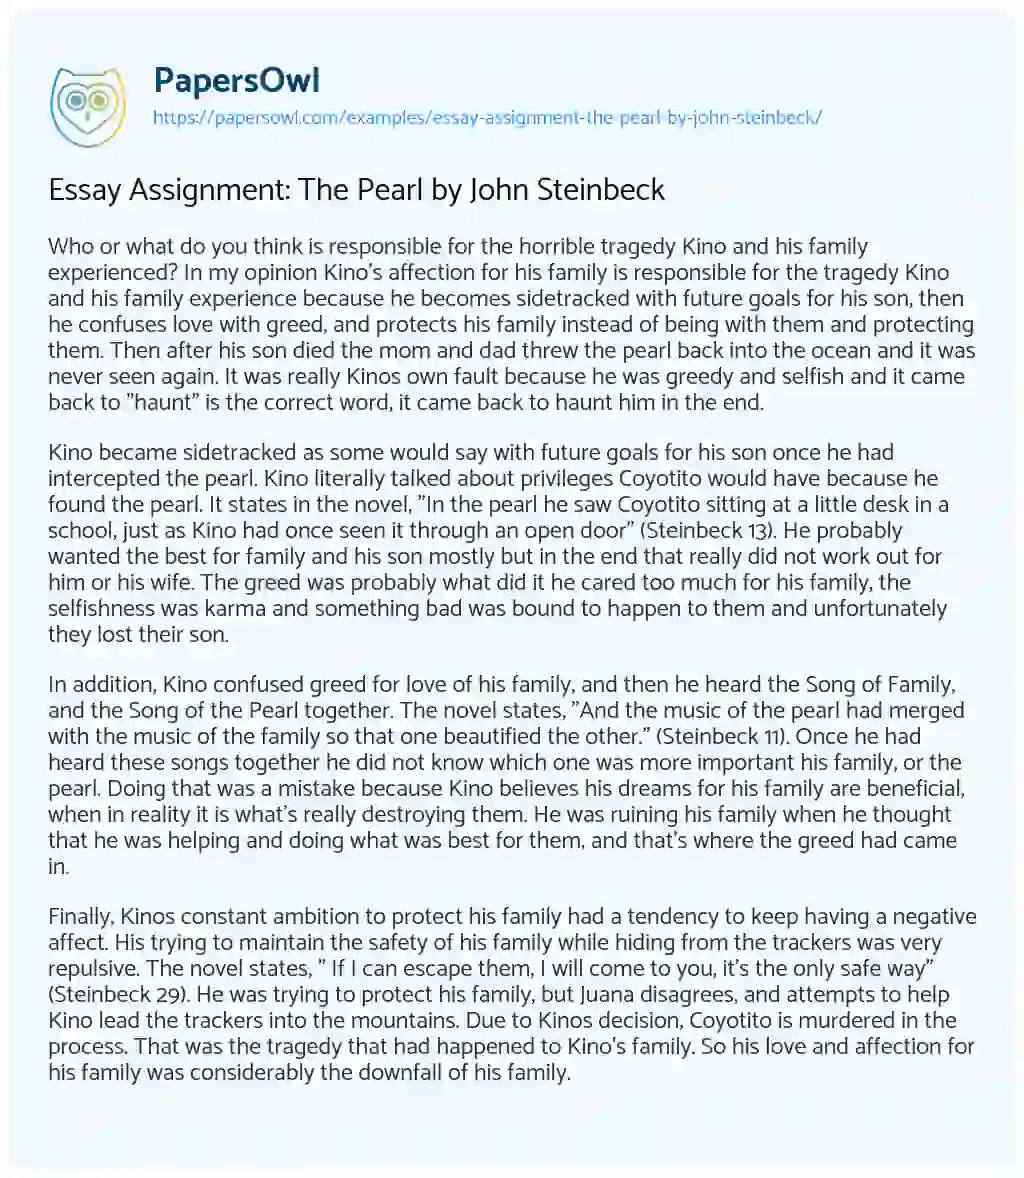 Essay on Essay Assignment: the Pearl by John Steinbeck